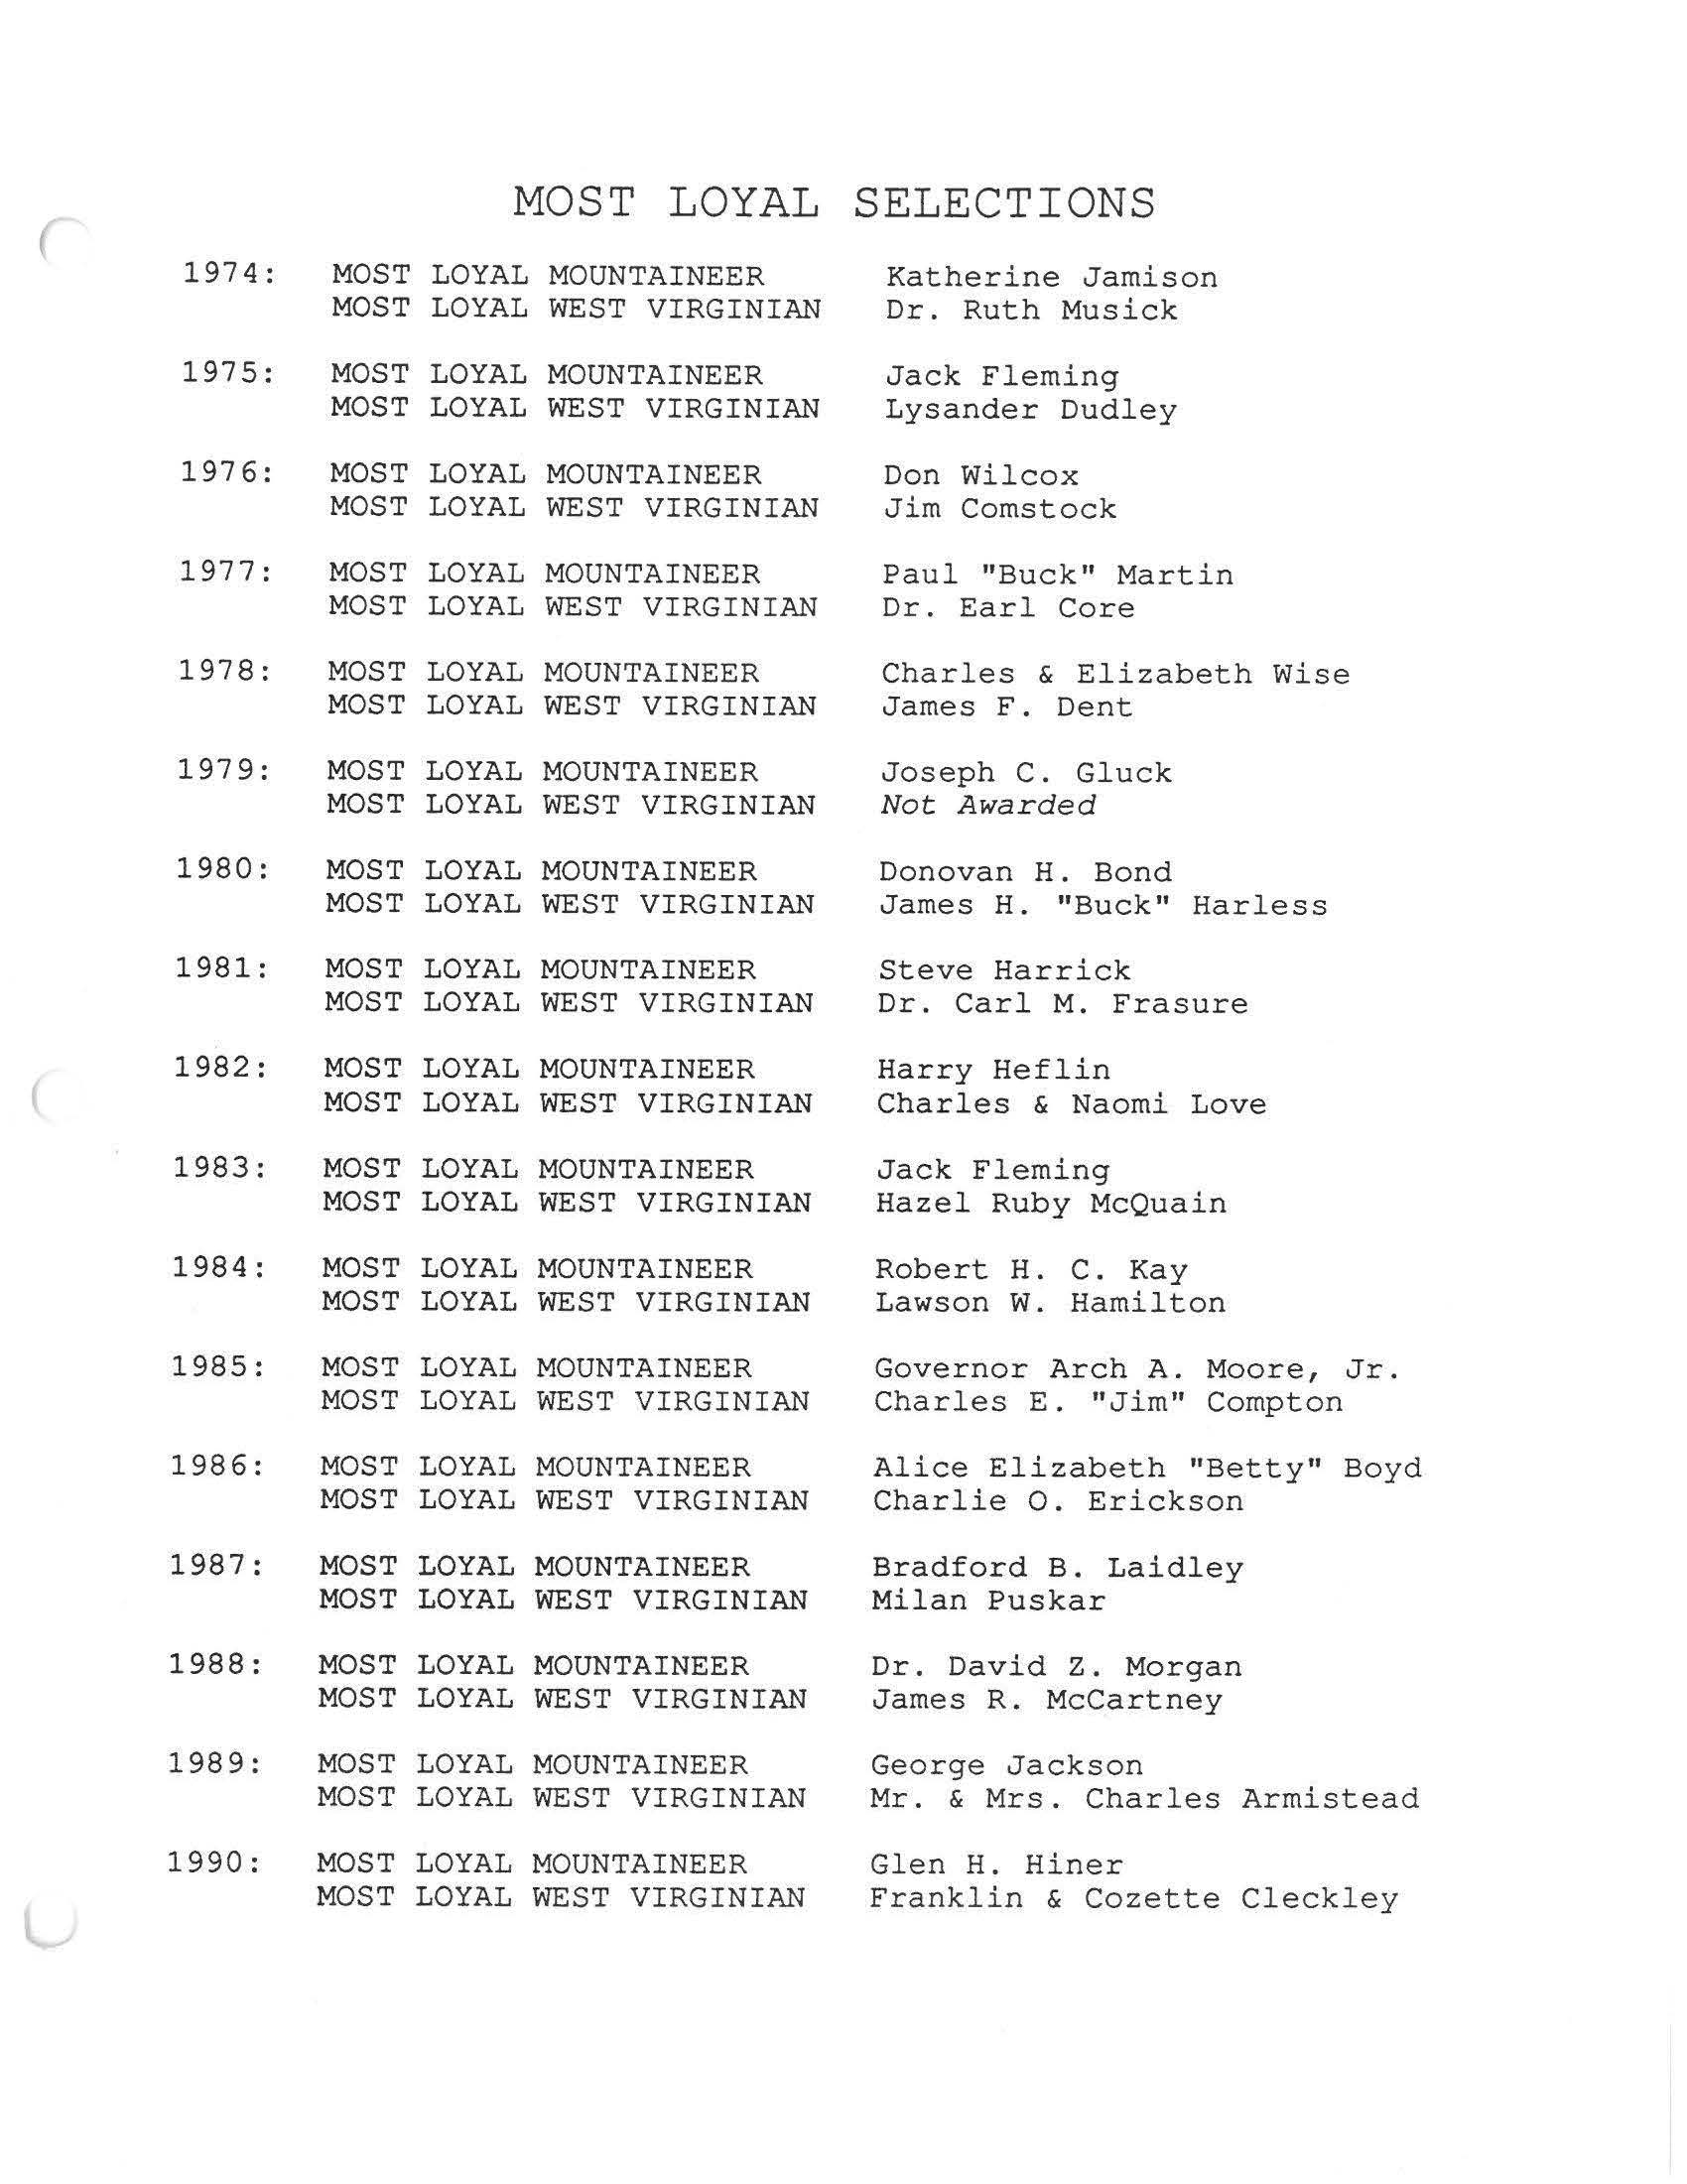 List of Most Loyal Mountaineer and Most Loyal West Virginian award winners, 1974-1990